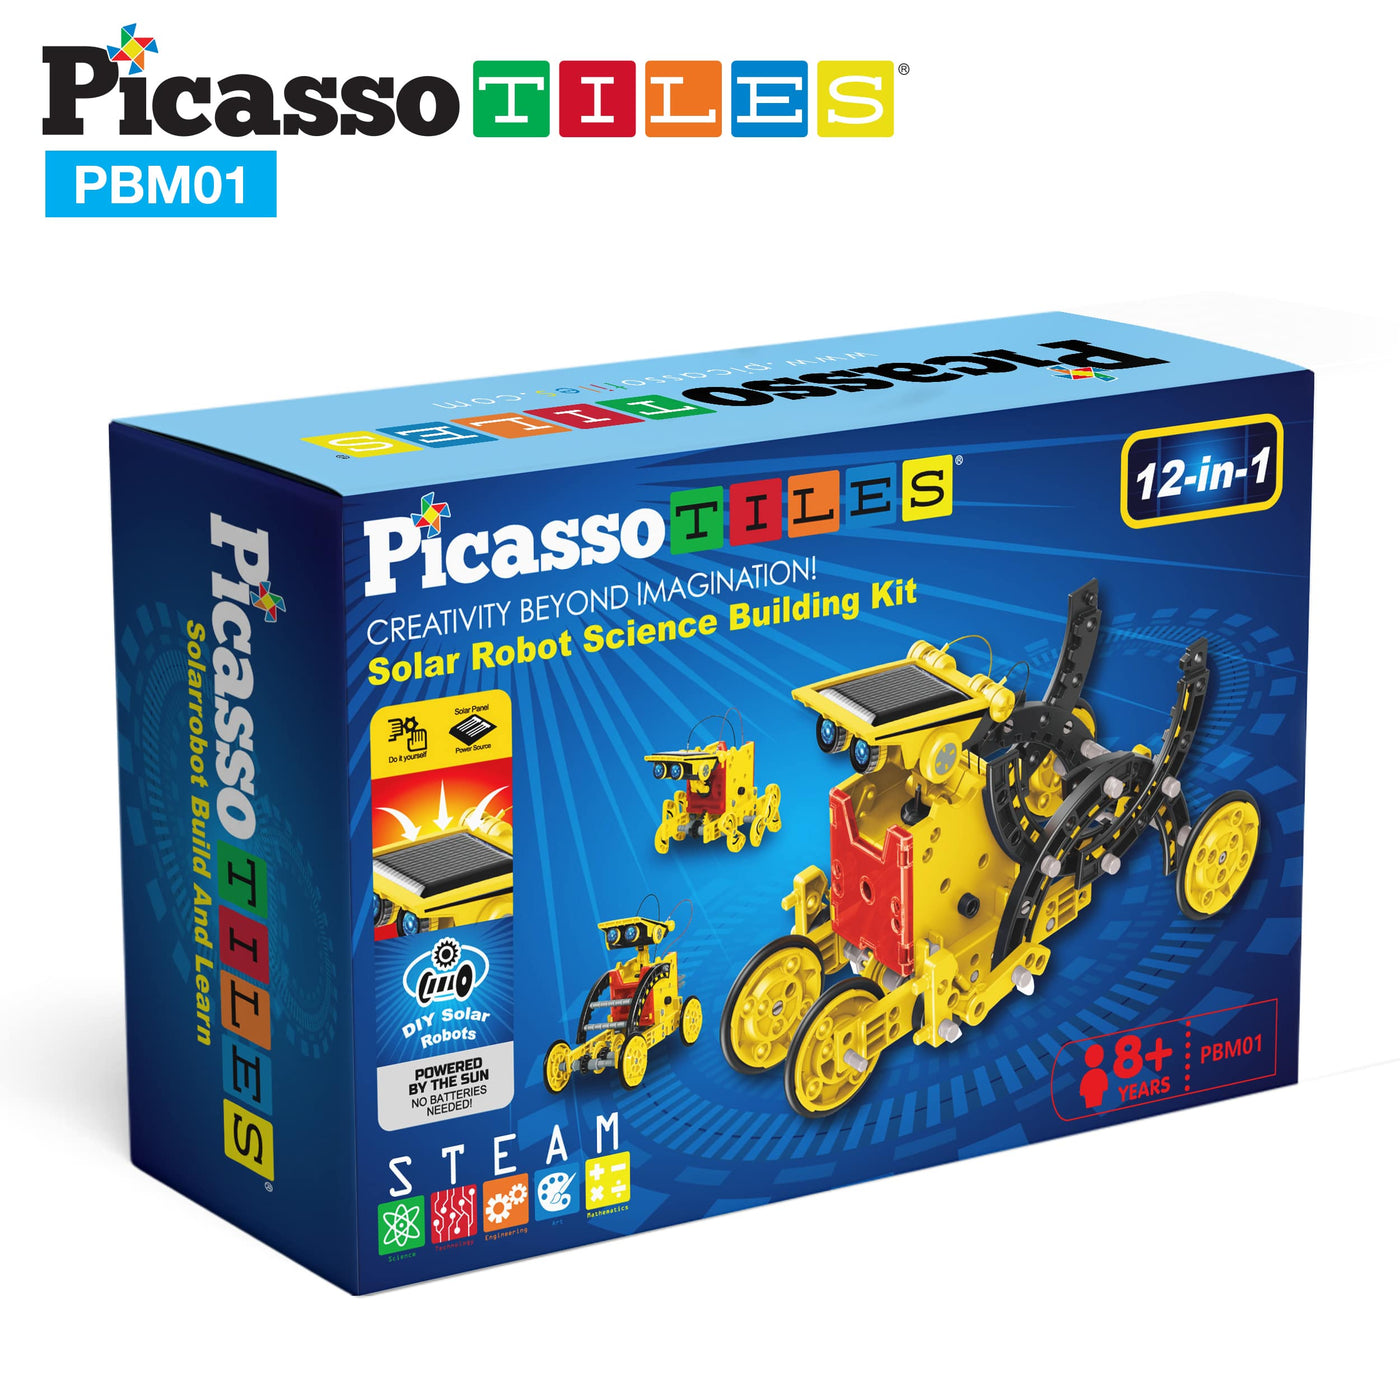 PicassoTiles 12-in-1 Solar Powered Space Robot Science Kit